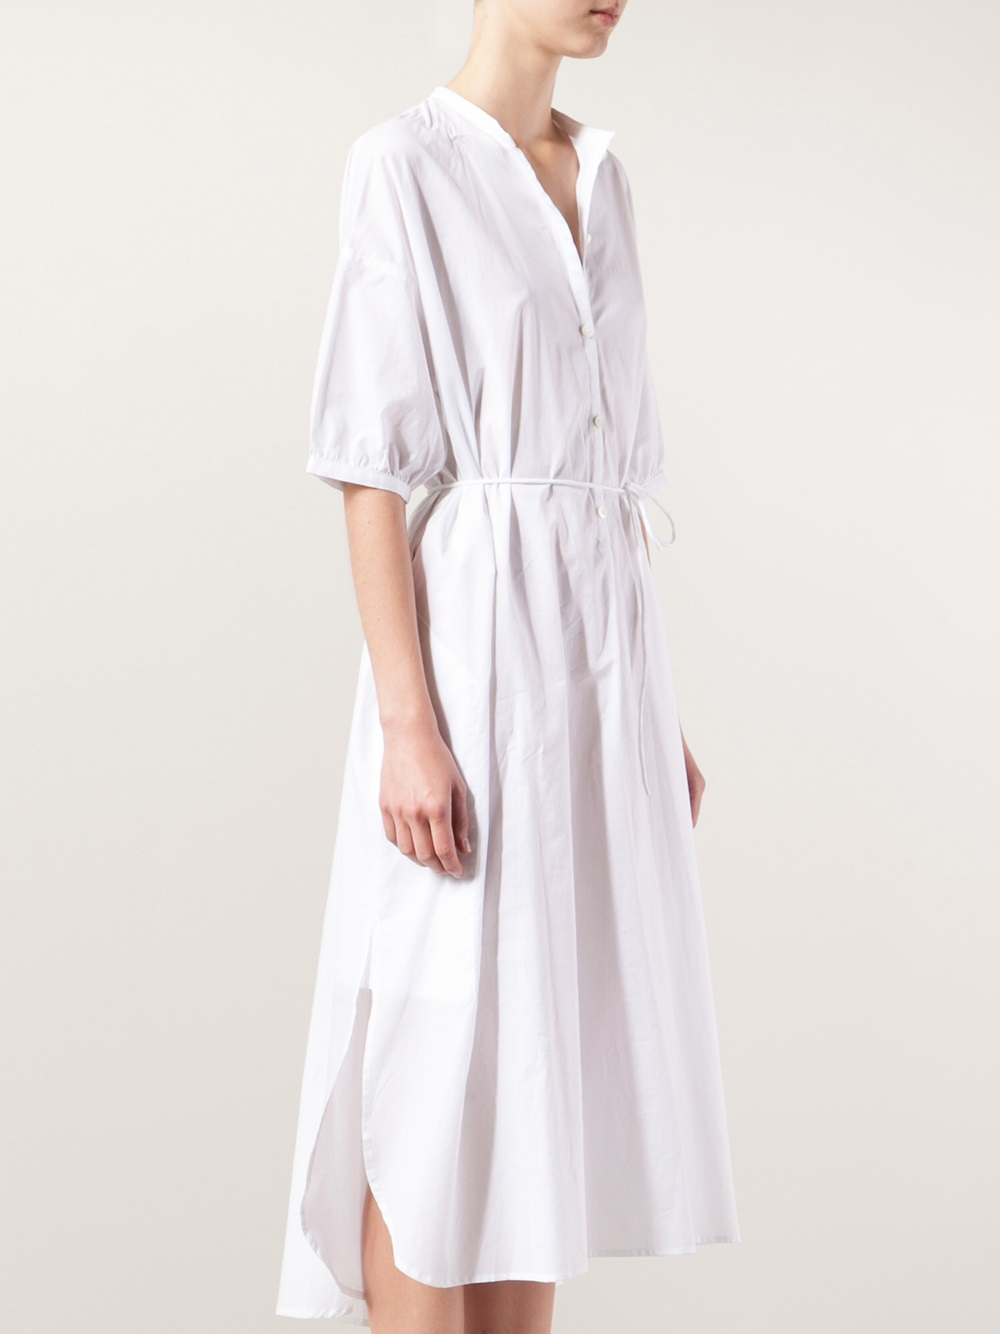 Christophe lemaire Loose Shirt Dress in White | Lyst